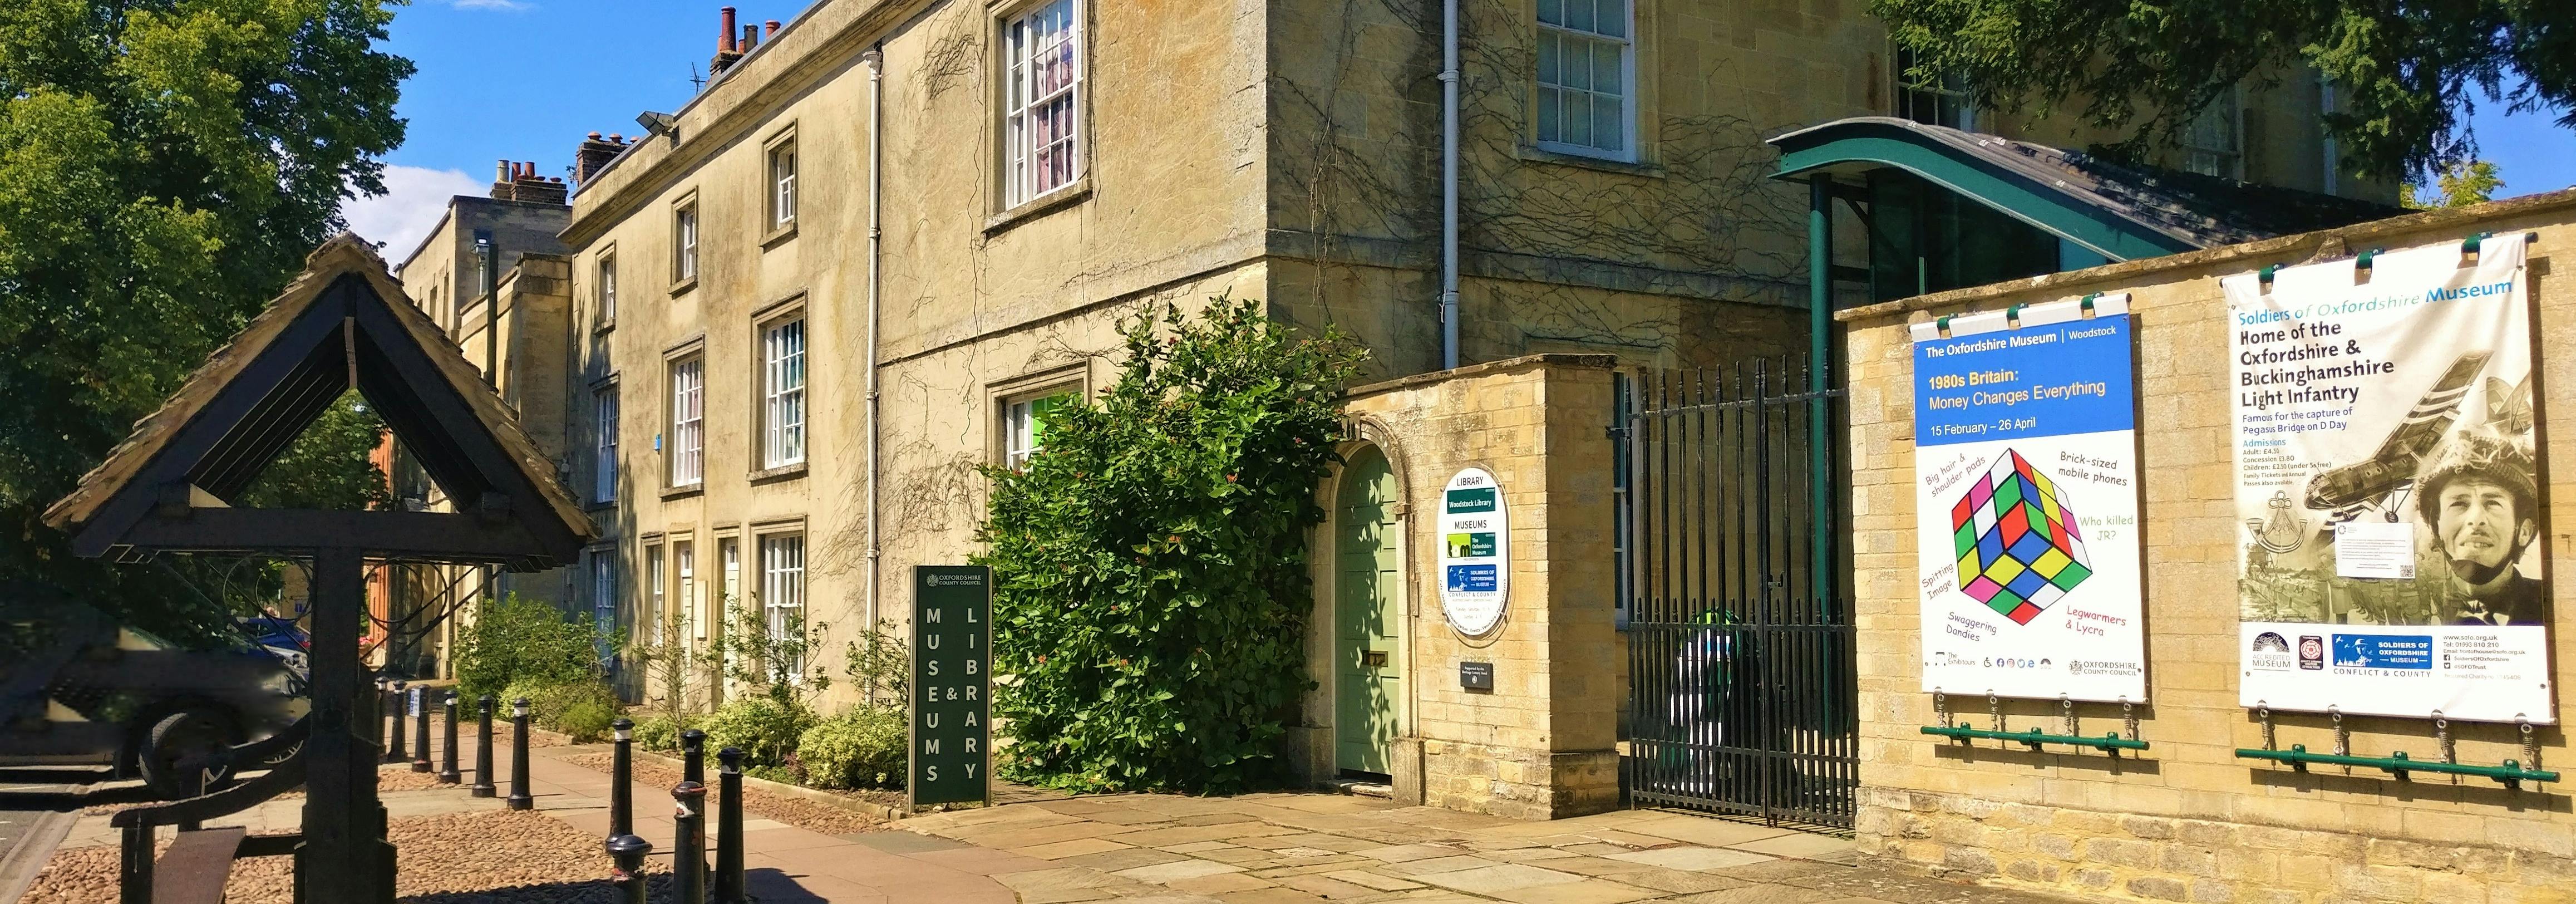 Entrance to the Oxfordshire Museum